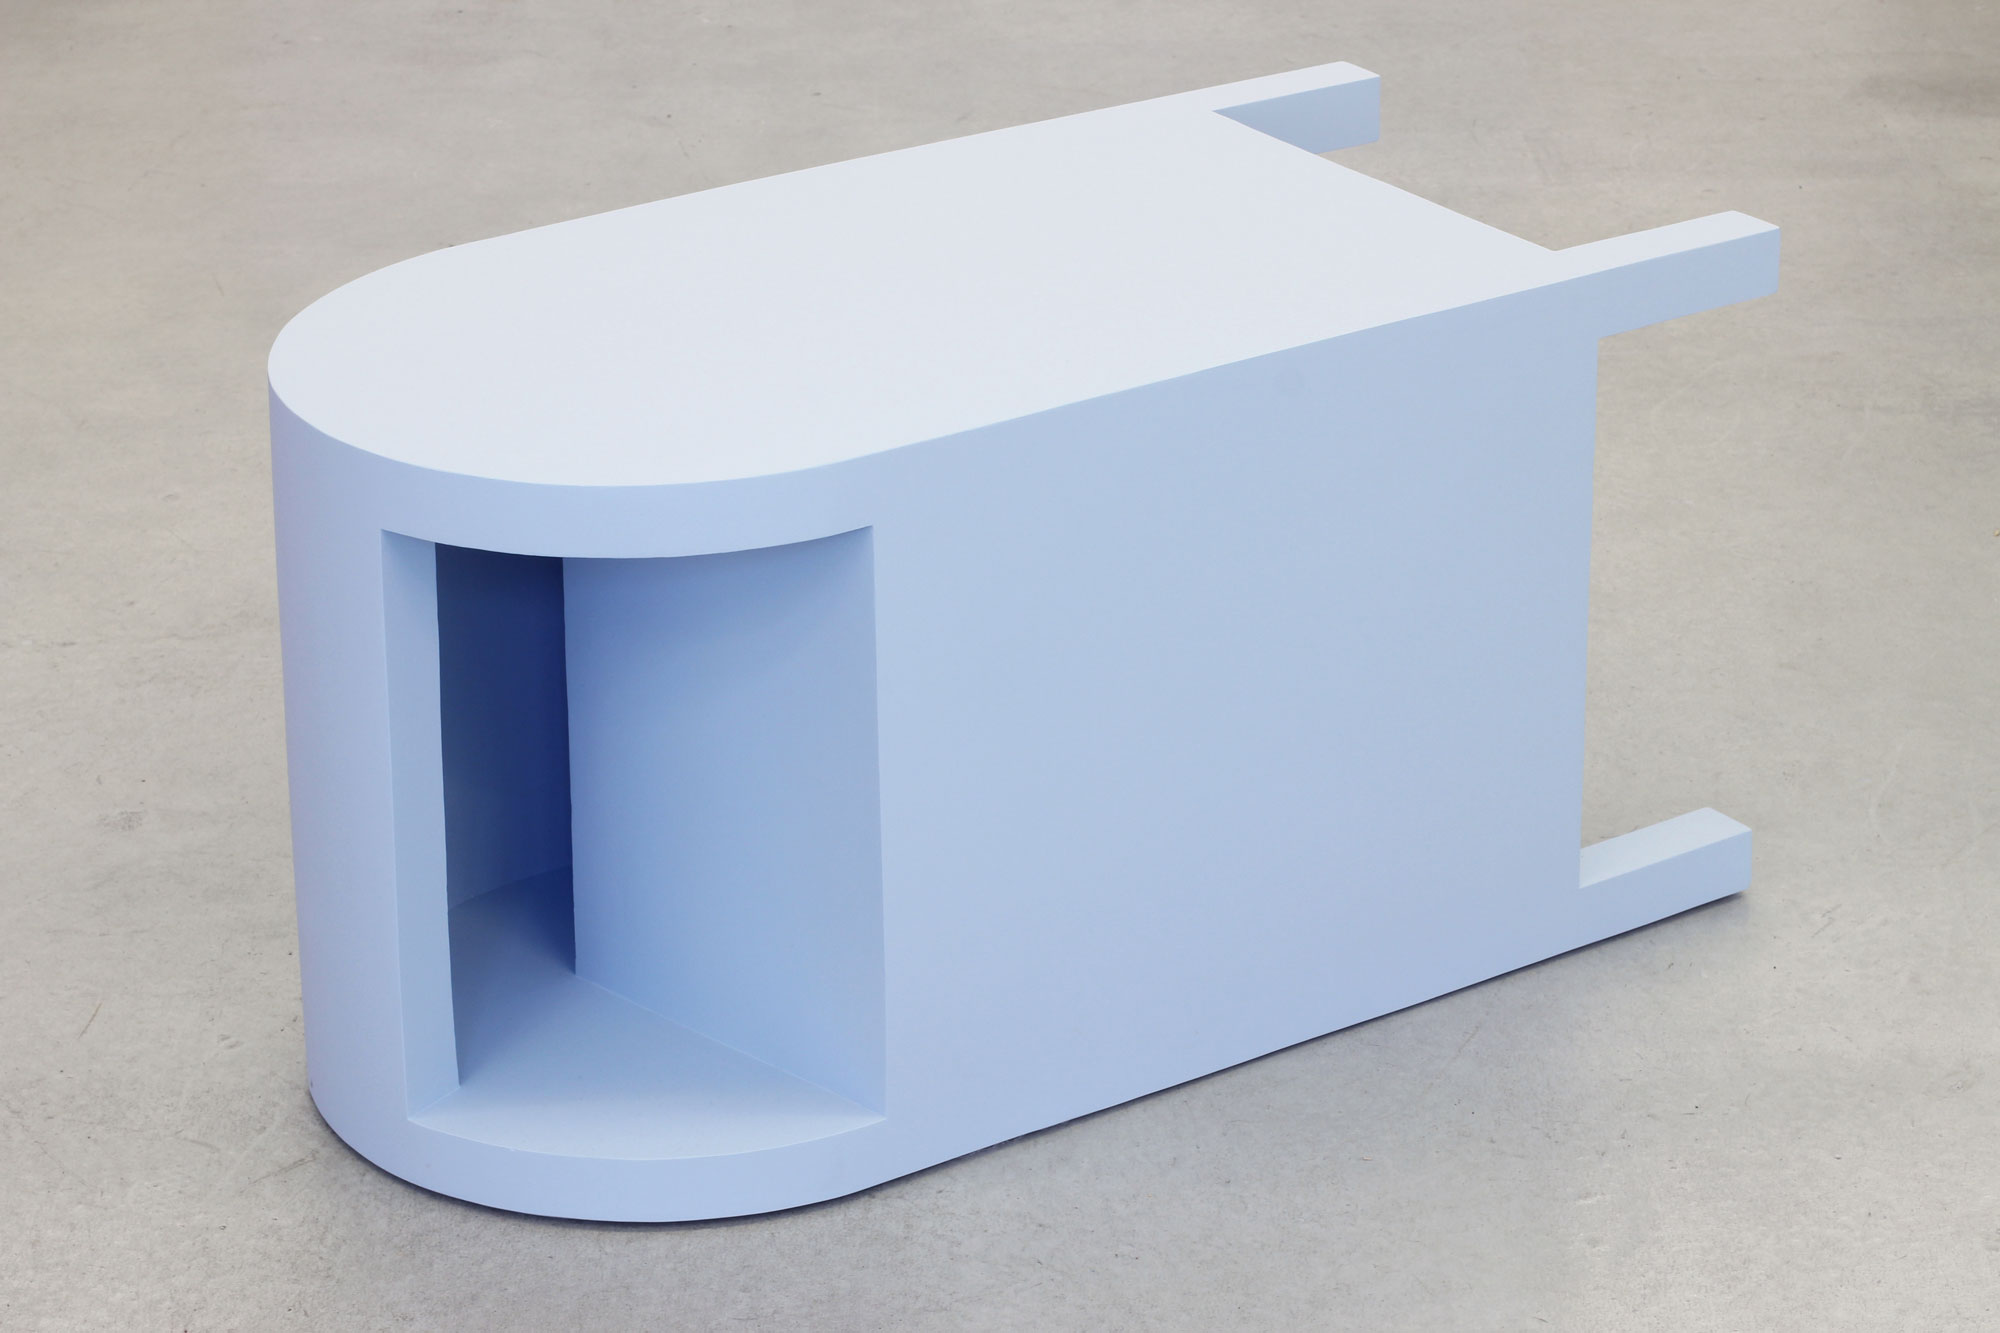 Nathaniel Robinson, Collection Box, 2015, polystyrene, polymer modified gypsum cement, glass fiber and paint, 22.5h x 42.5w x 21.5d in.